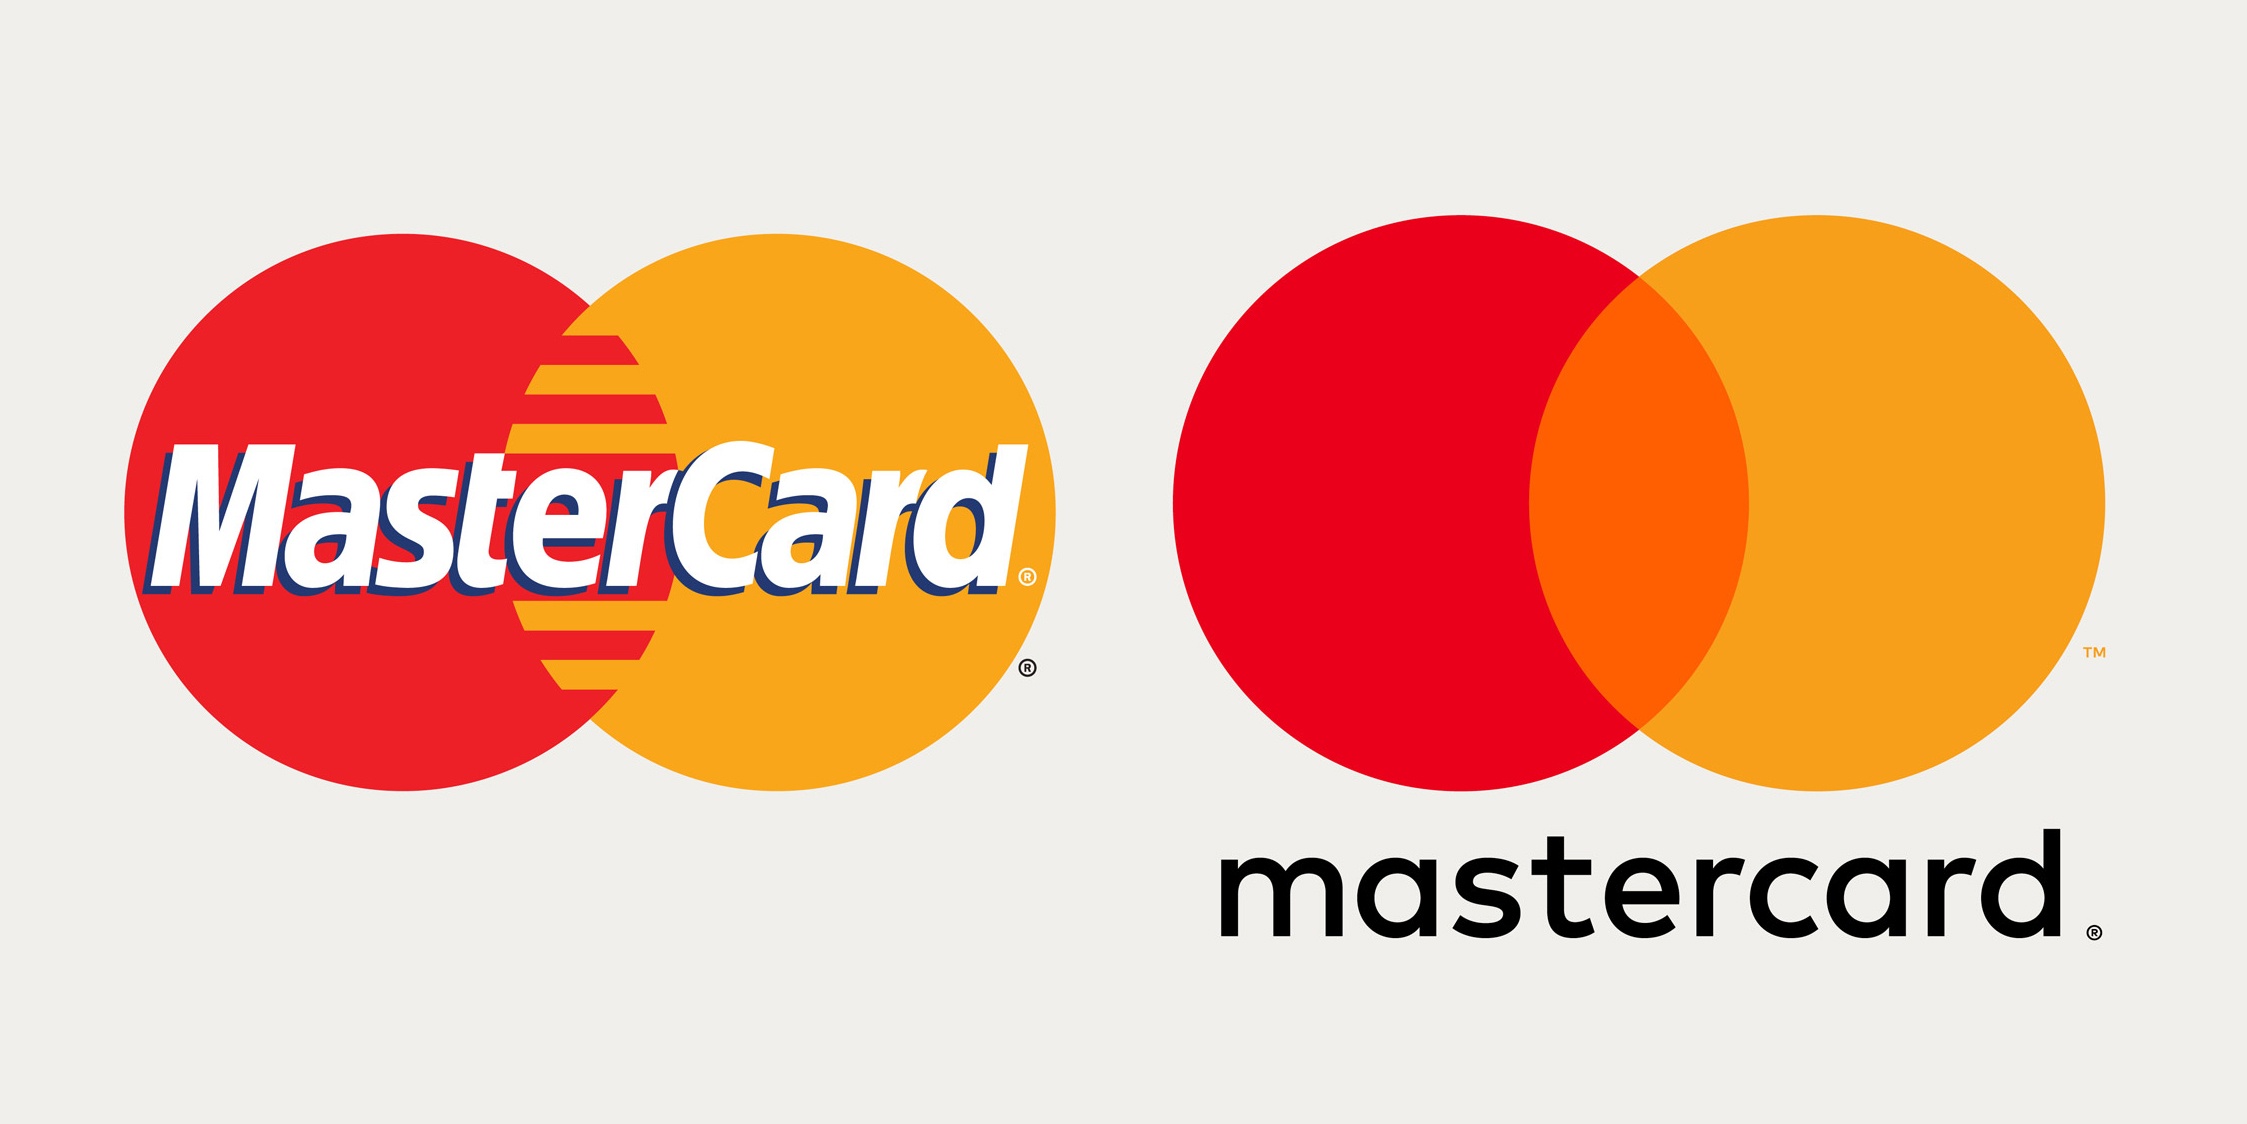 4 Branding Lessons from the MasterCard Logo Redesign